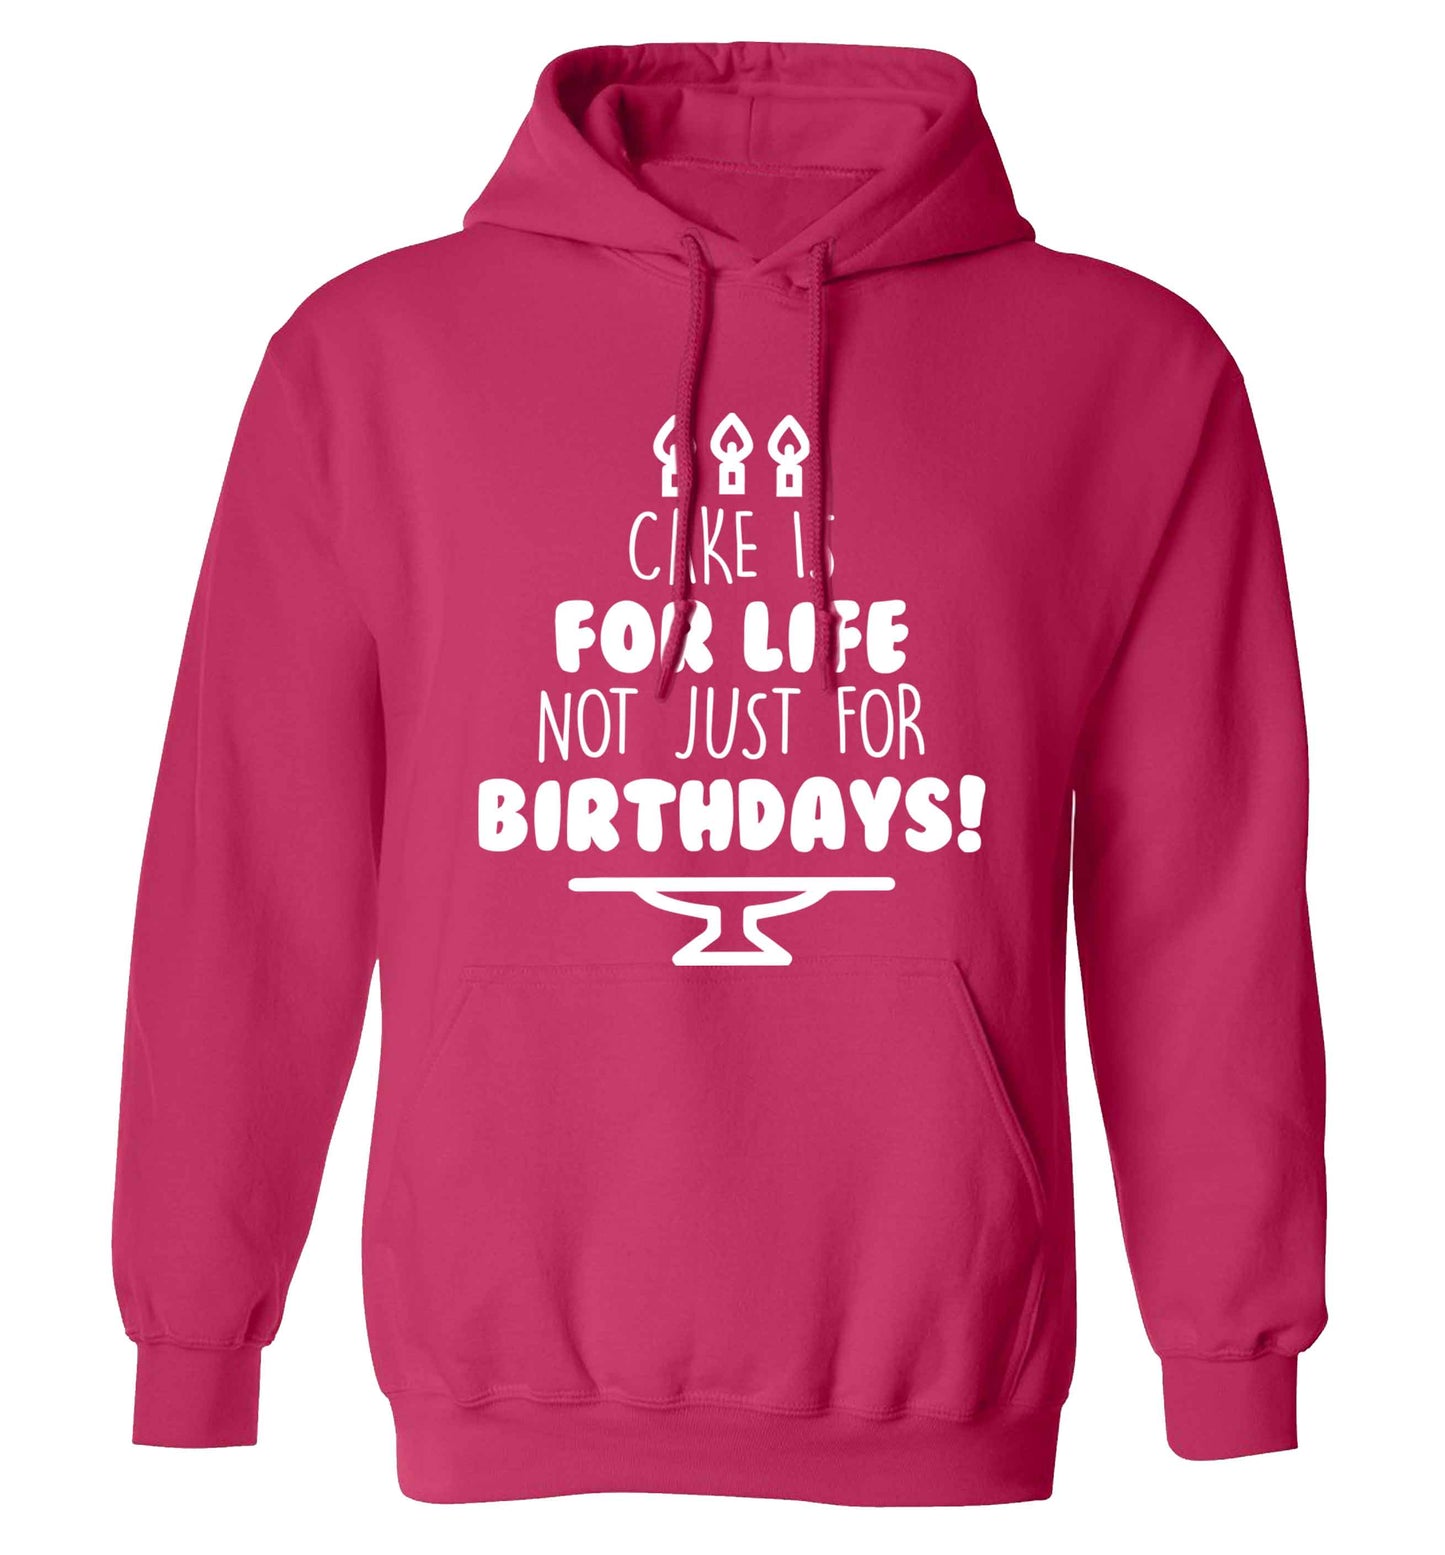 Cake is for life not just for birthdays adults unisex pink hoodie 2XL